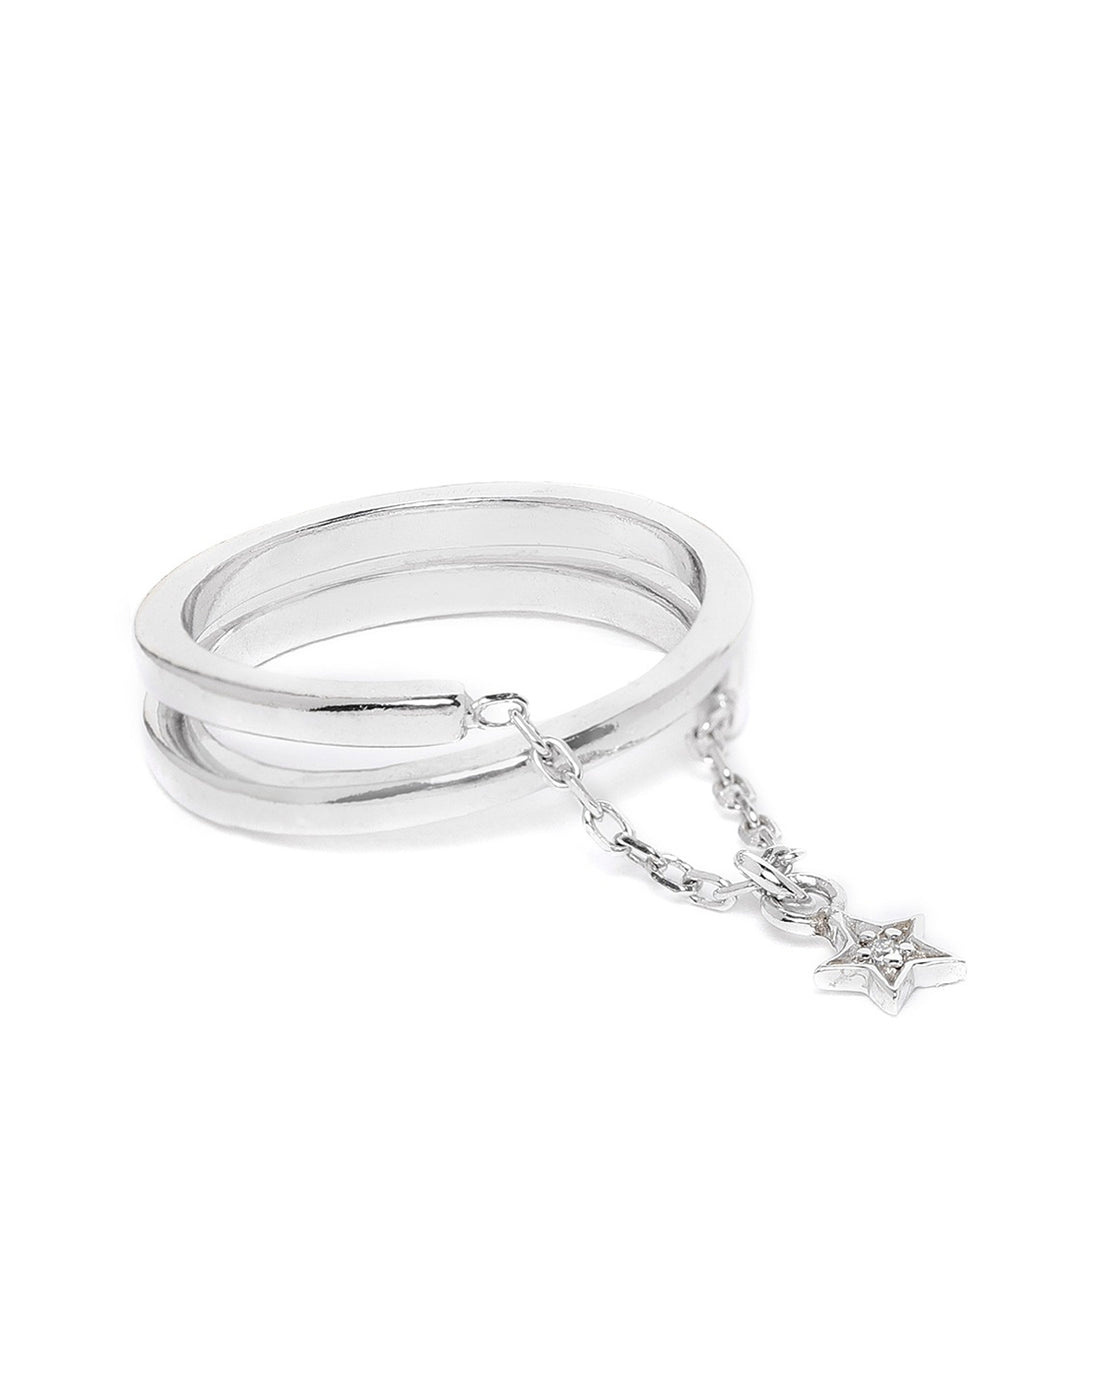 Carlton London Rhodium Plated Silver Toned Cz Studded With Dangling Star Adjustable Finger Ring For Women